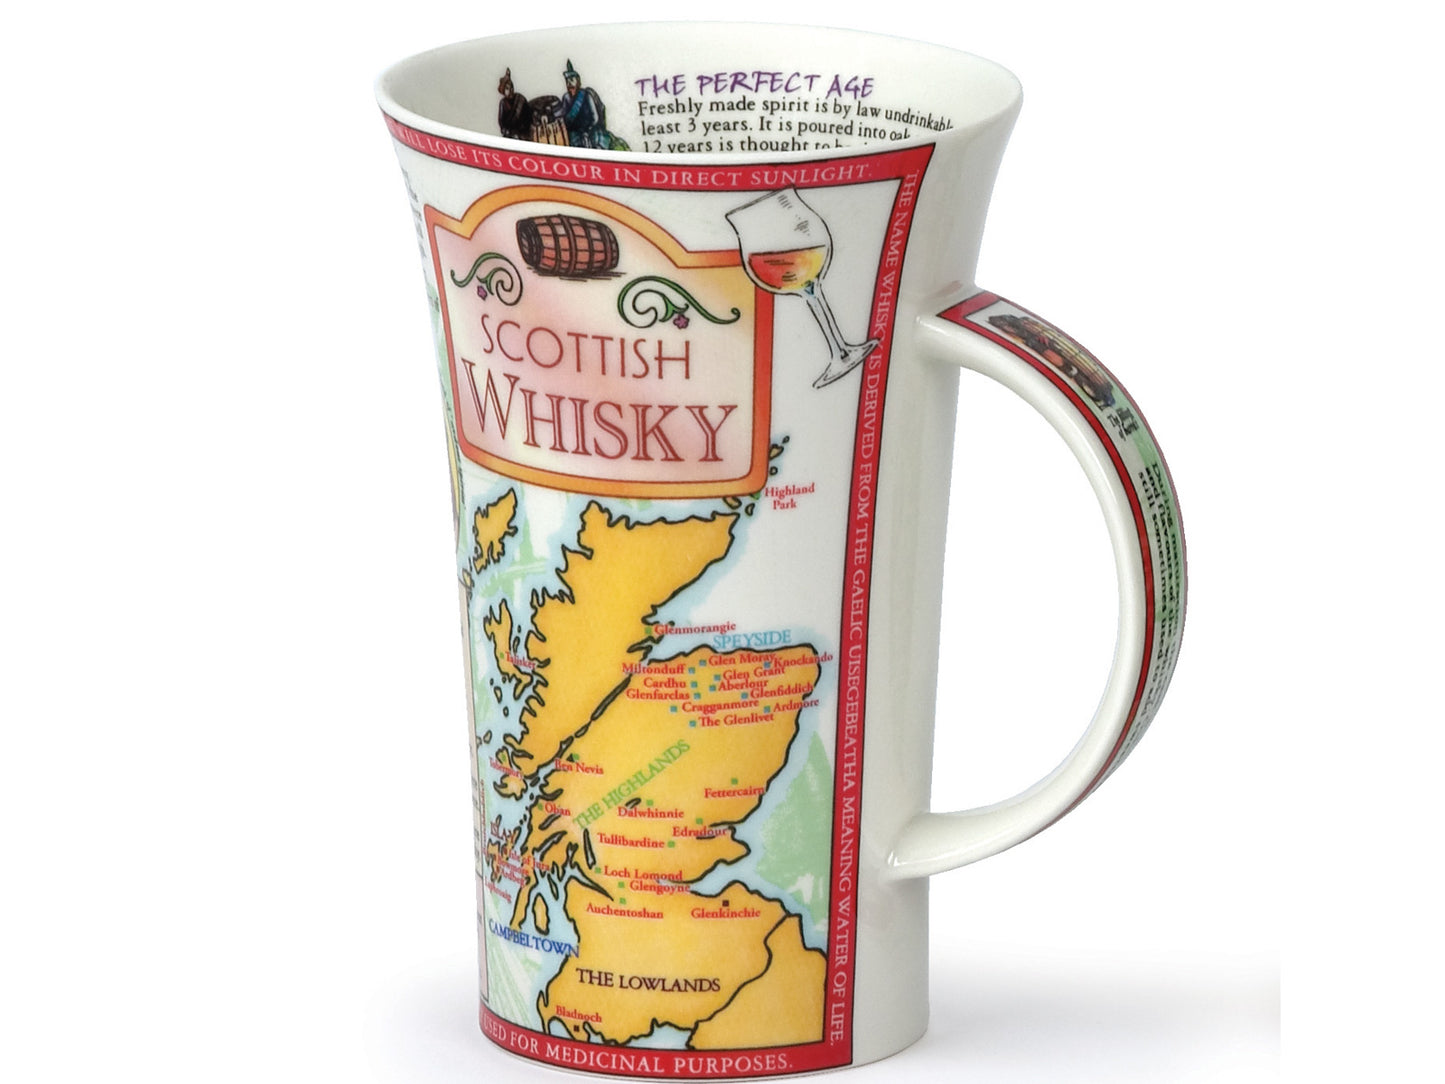 Dunoon Glencoe Scottish Whiskey Mug is a large fine bone china mug that depicts the history of Scottish whiskey, along with the regions whiskey is made in and the art of making whiskey.